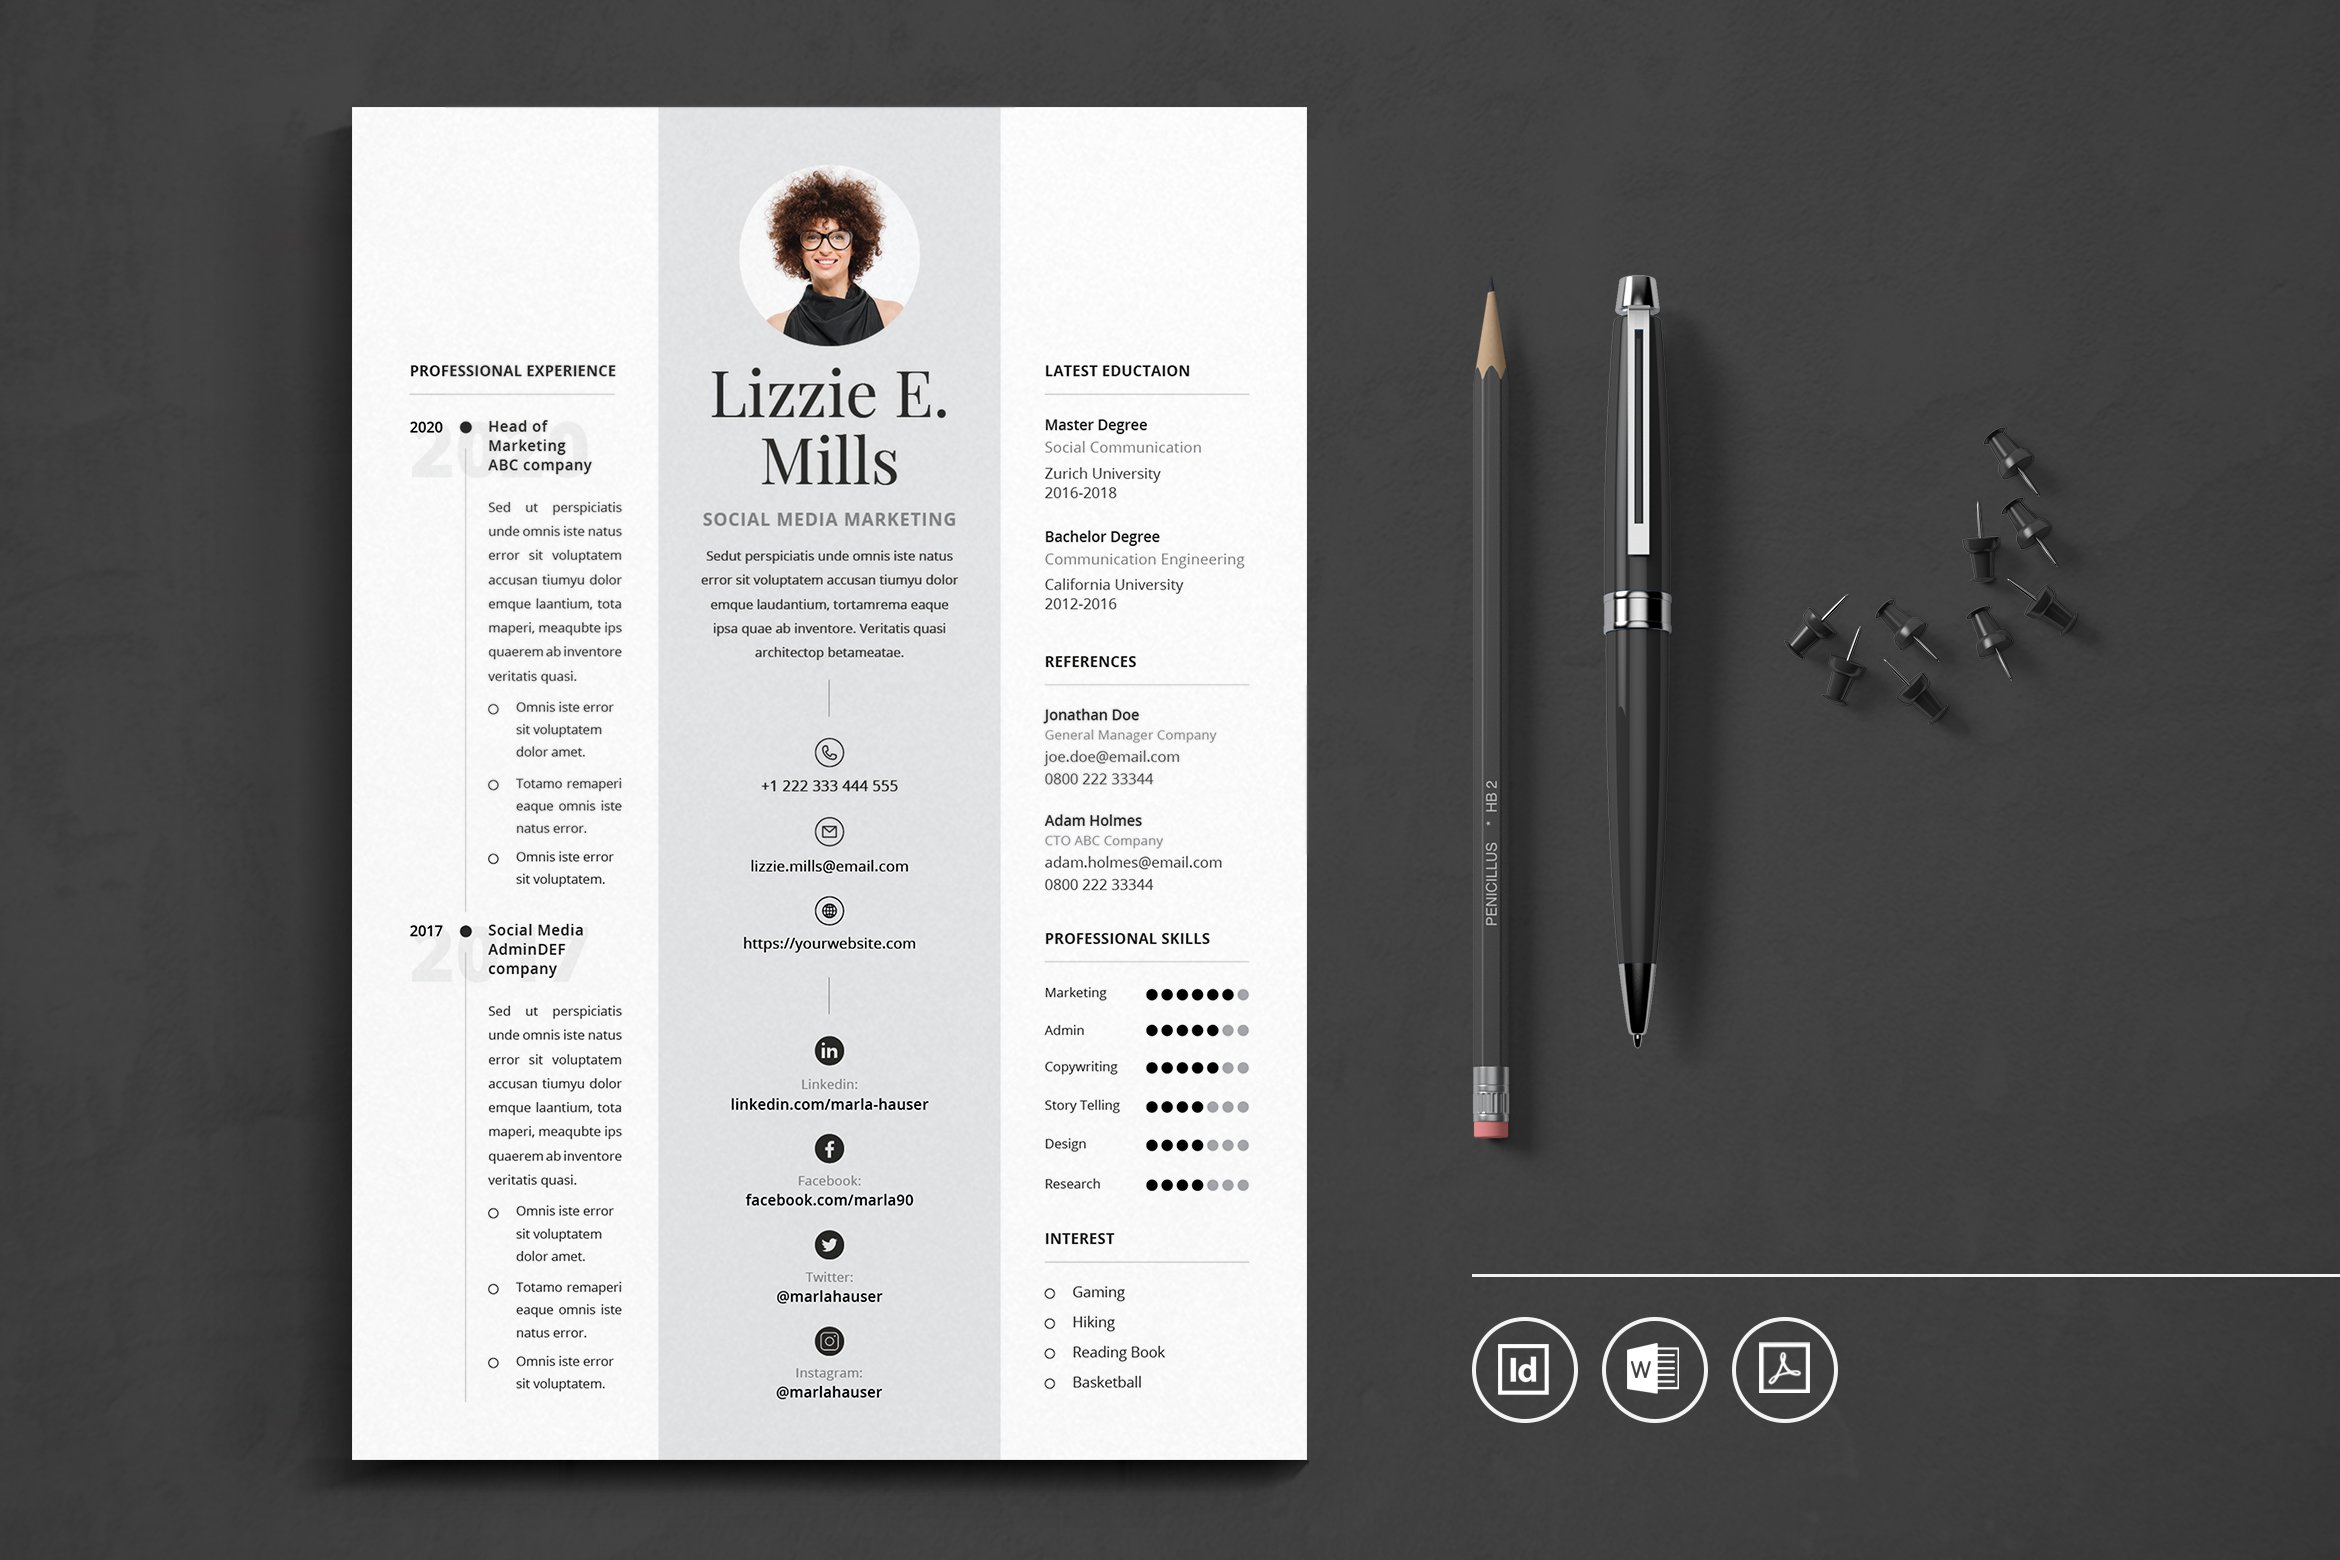 Cool resume template with an interesting design.